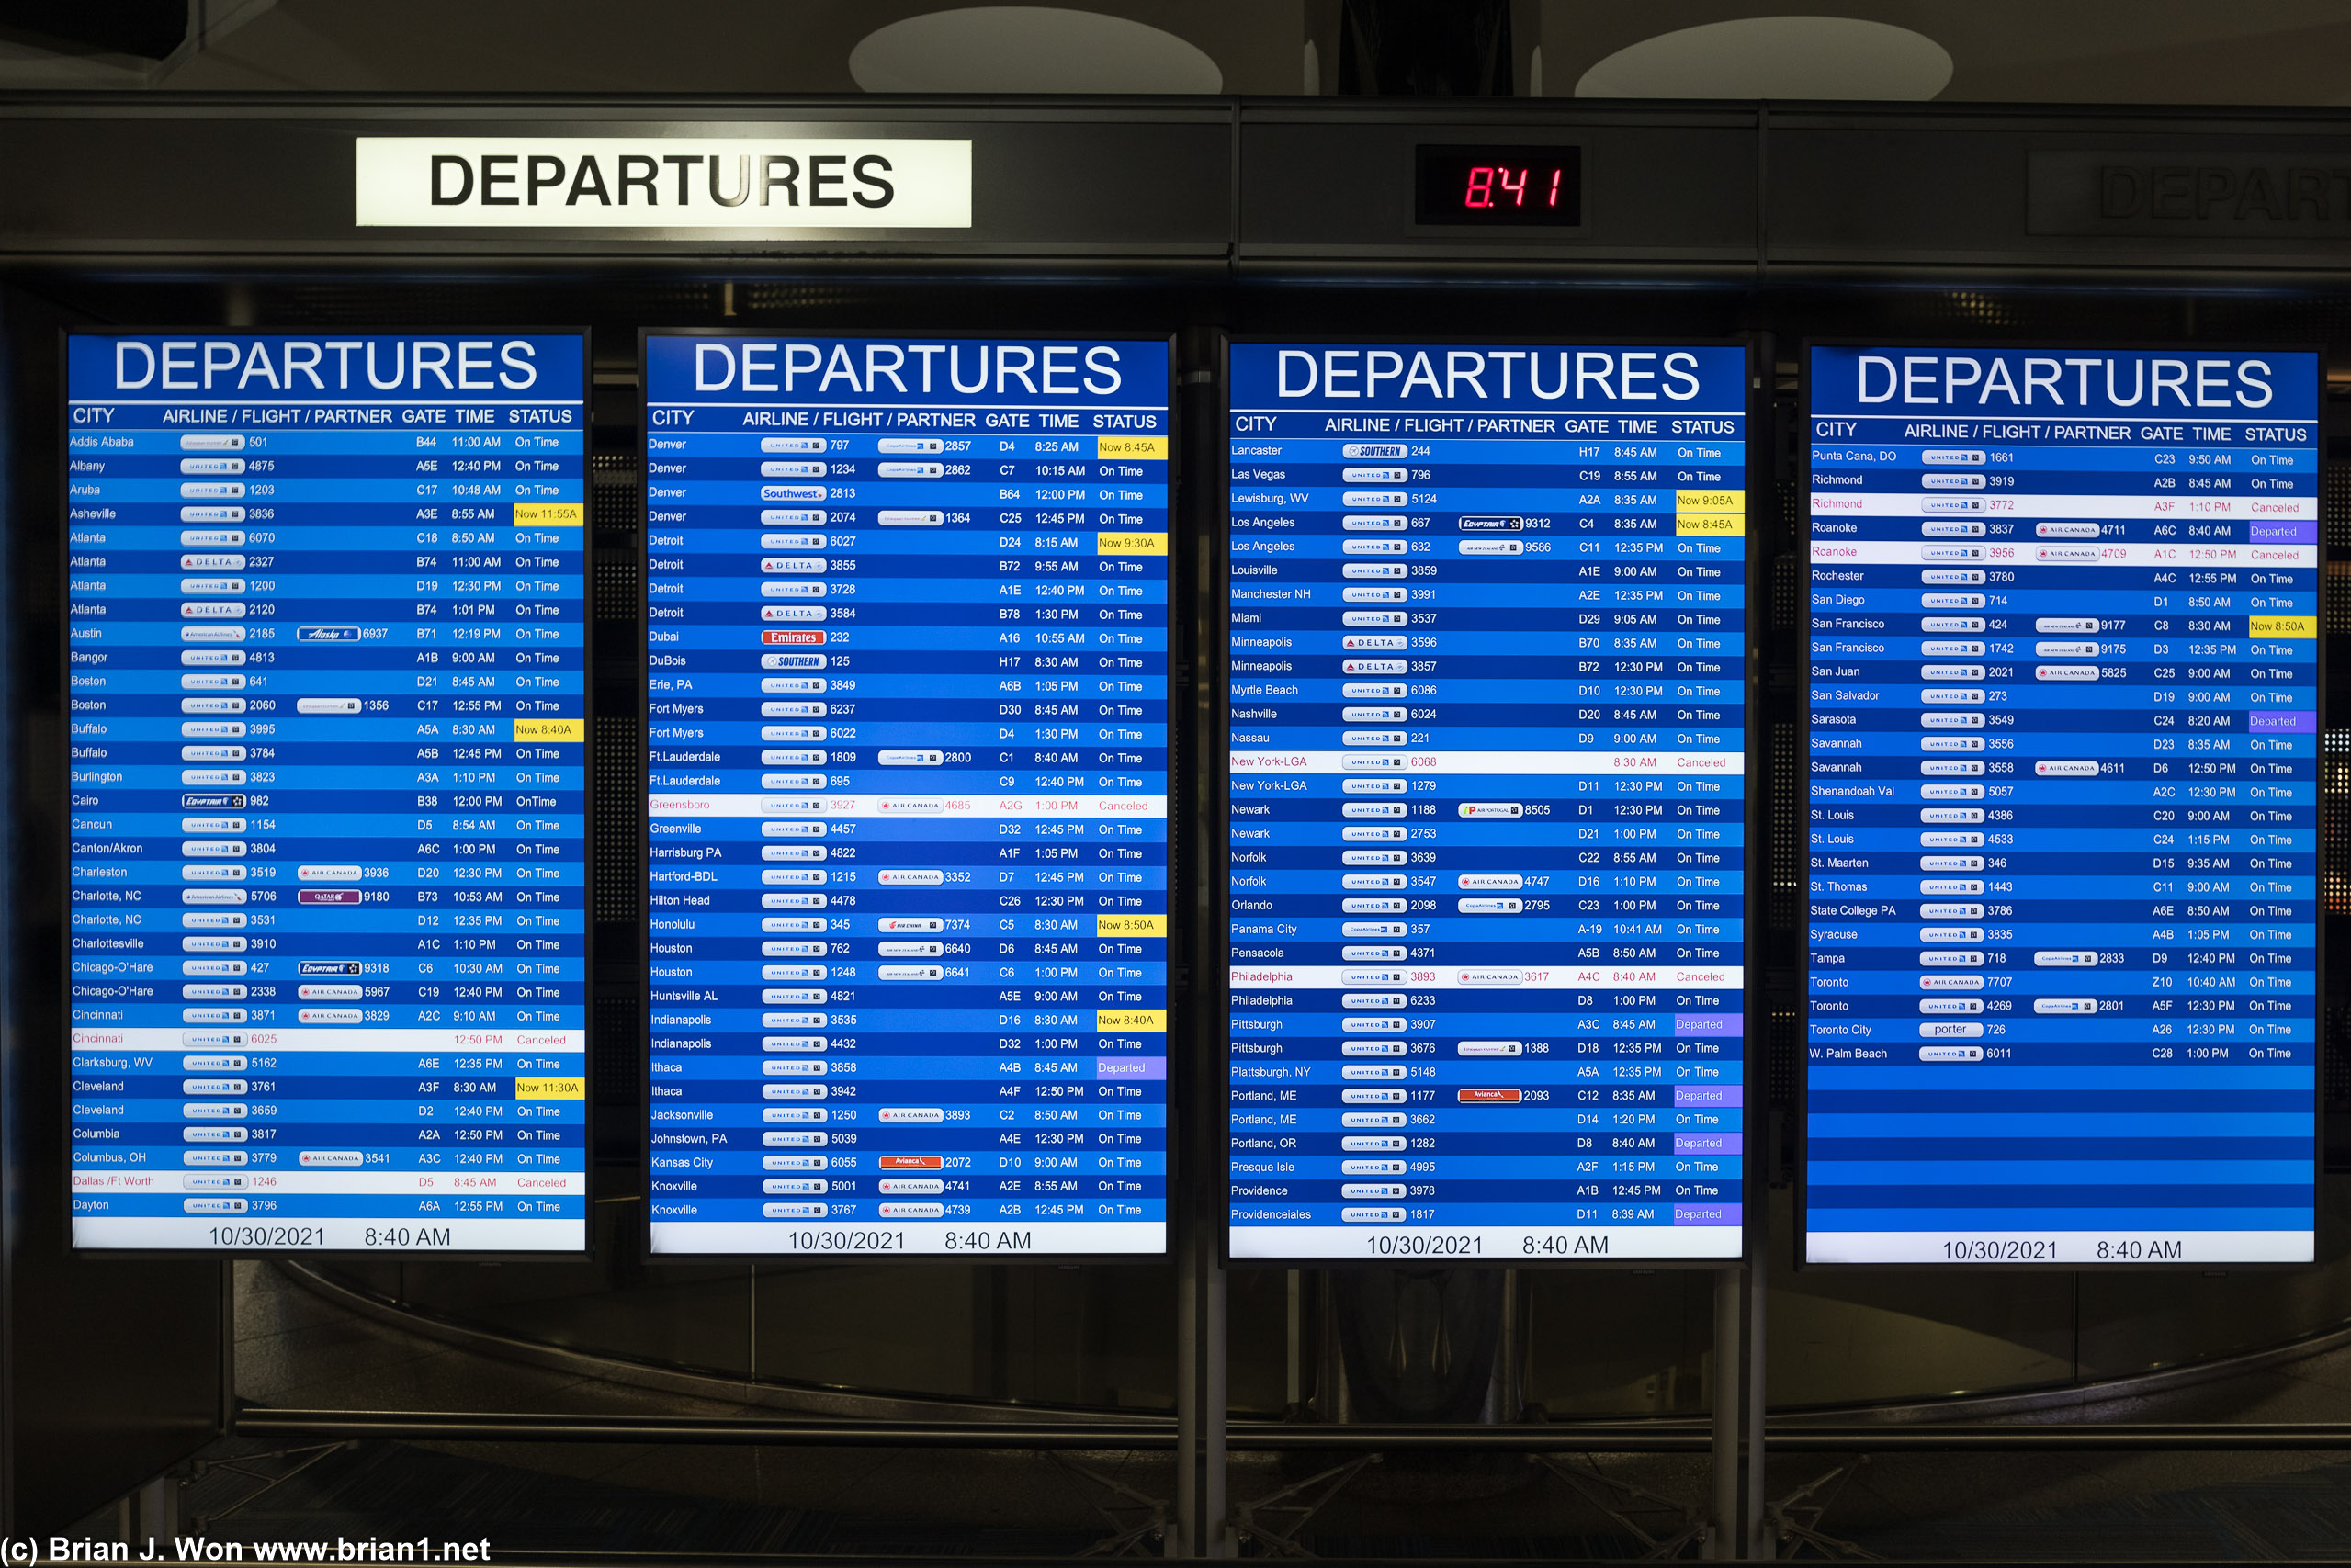 Departures board is pretty busy.